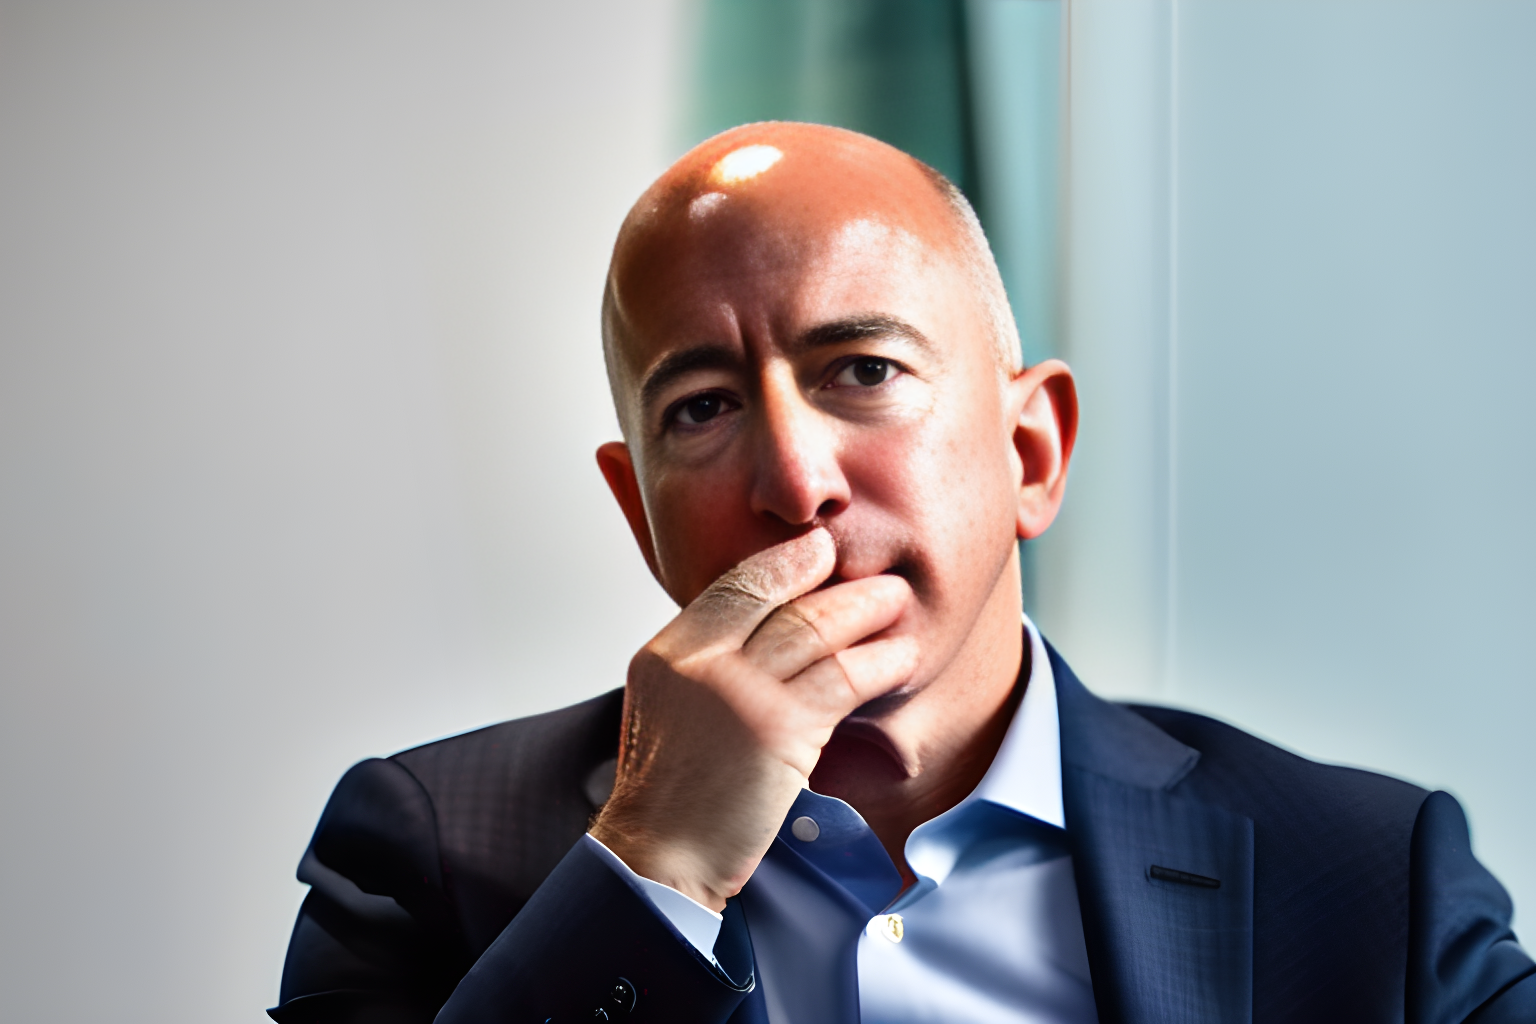 Breathtaking photograph of Jeff bezos covering his mouth